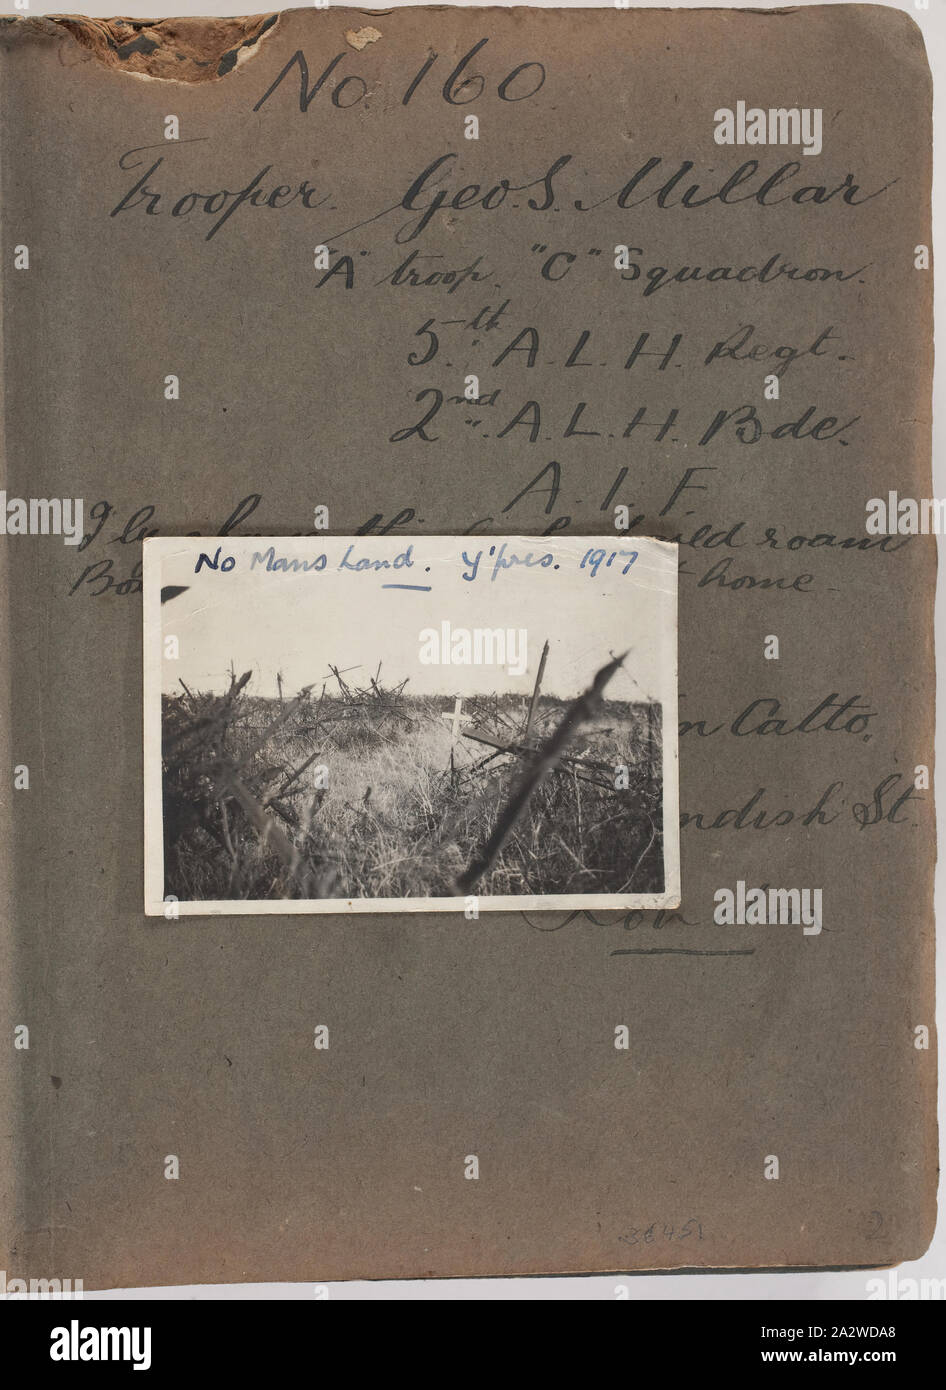 Photograph - Grave in 'No Mans Land', Ypres, Belgium, Trooper George Simpson Millar, World War I, 1917, Album page with photograph. The album belonged to George Simpson Millar, an Australian serviceman in the 5th Australian Light House during World War I. The album contains 103 small black and white photographs, mainly of Gallipoli in 1915 and some of France and Belgium. They are believed to have been taken by Trooper George Simpson Millar, service no. 160, 'A' Troop, 'C' Squadron, 5th Australian Stock Photo